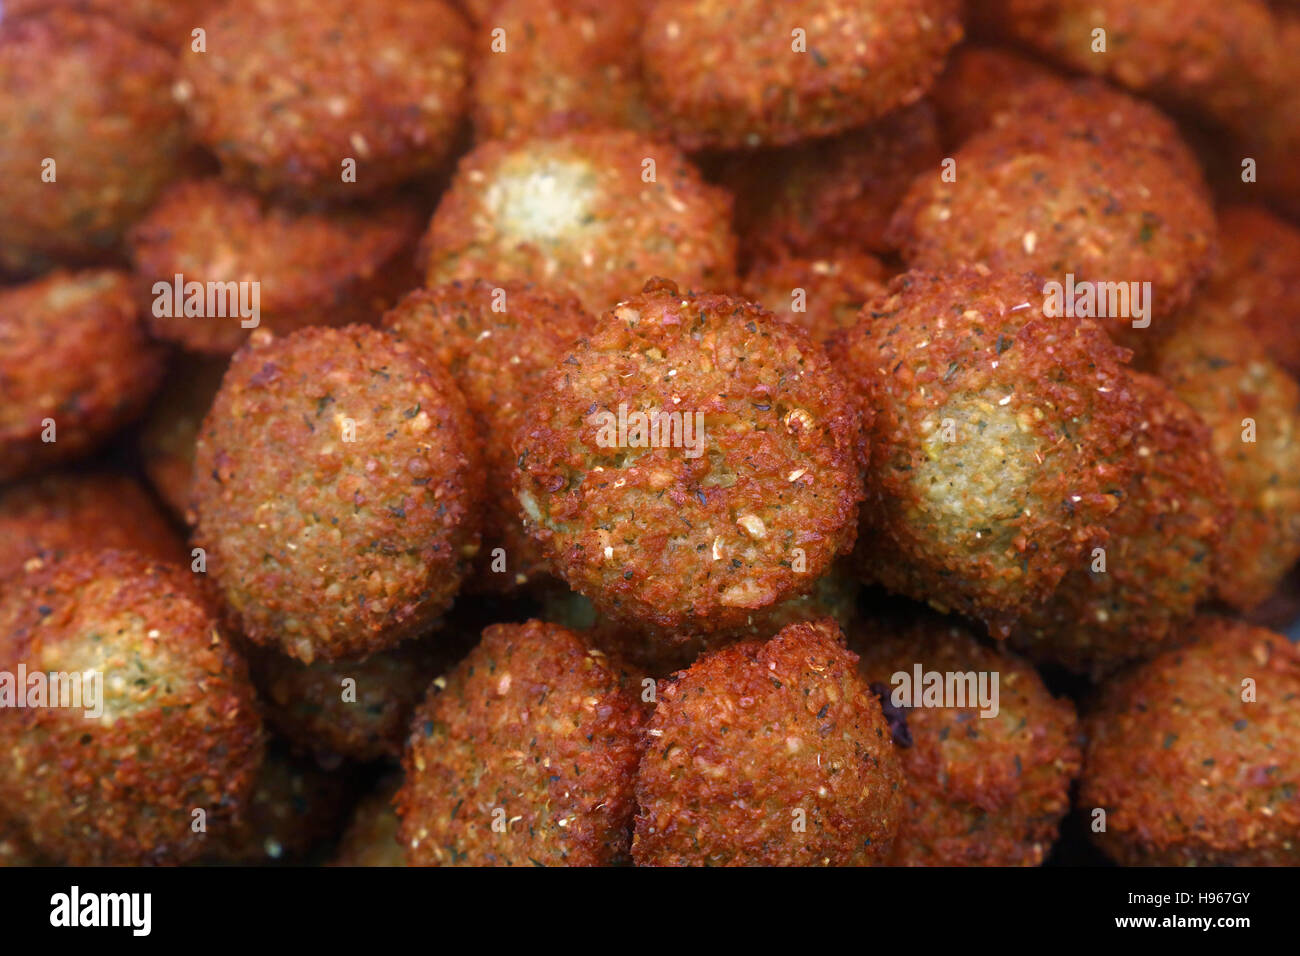 Traditional oriental Middle Eastern meal dish of deep fried ready to eat falafel balls on retail market display, close up Stock Photo